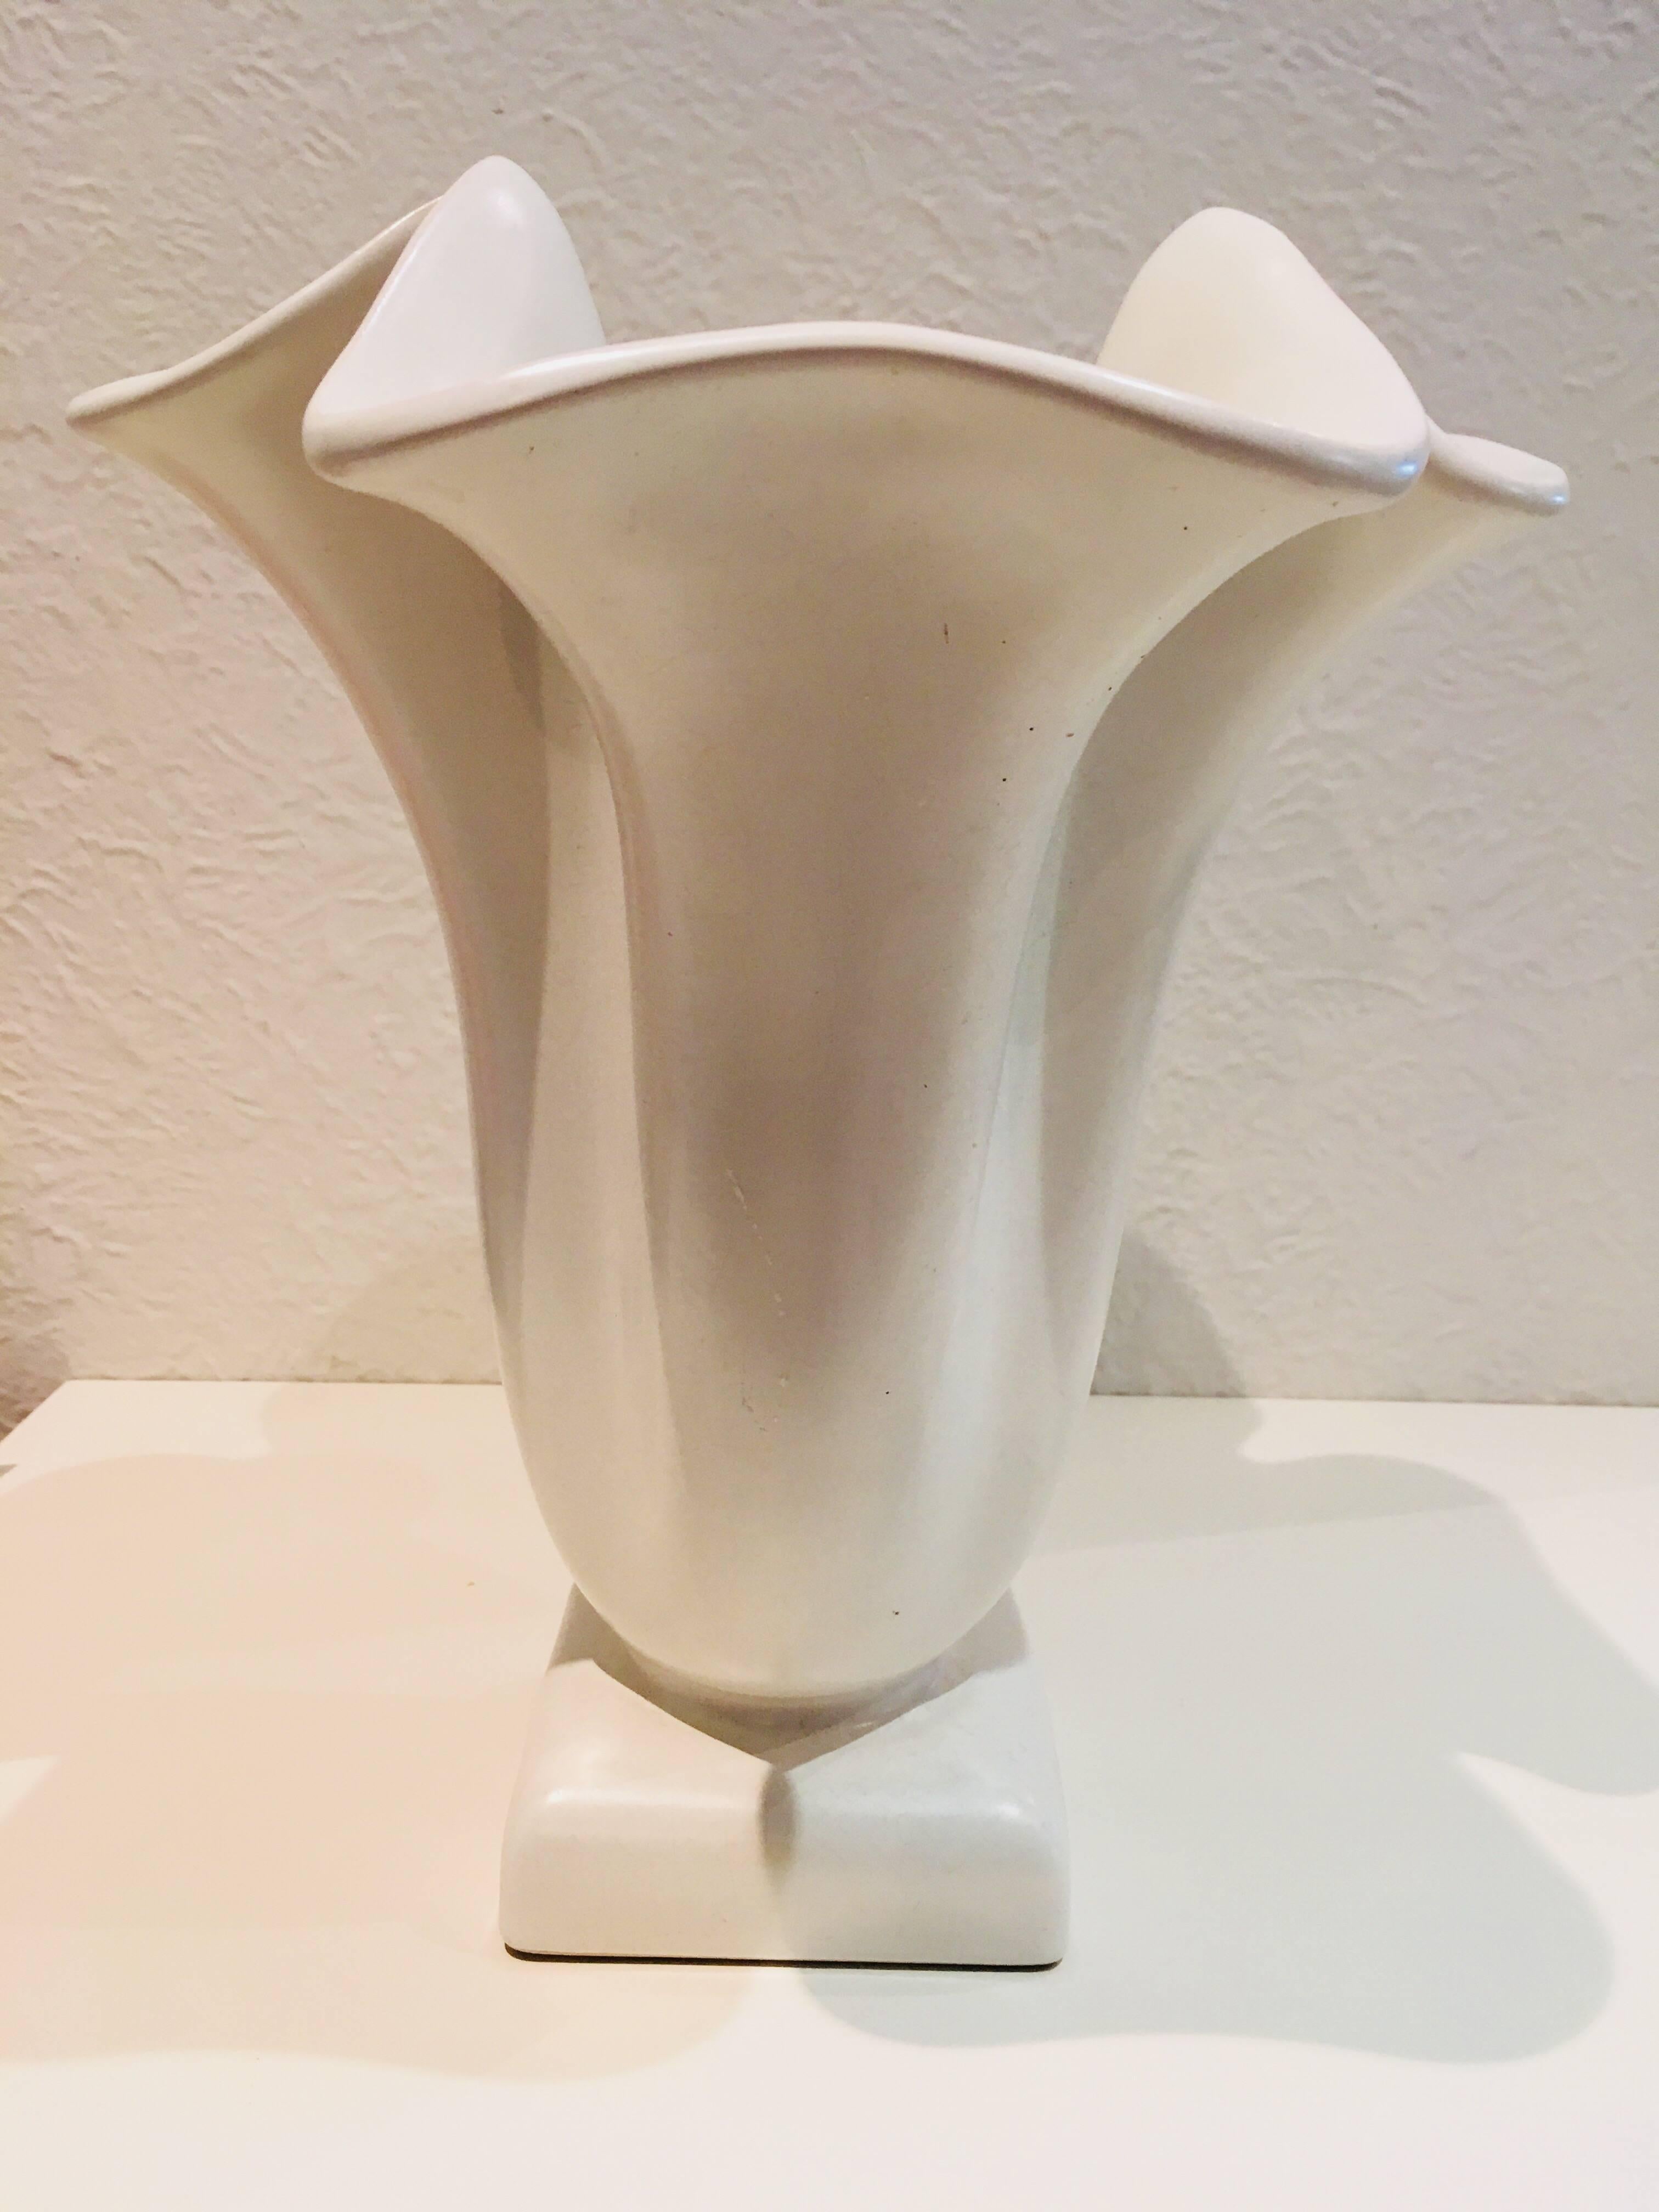 Henning Rathjen Australian pottery vase, stylized free flowing form. These are amongst the most desirable and highly regarded designs by this Australian artist.